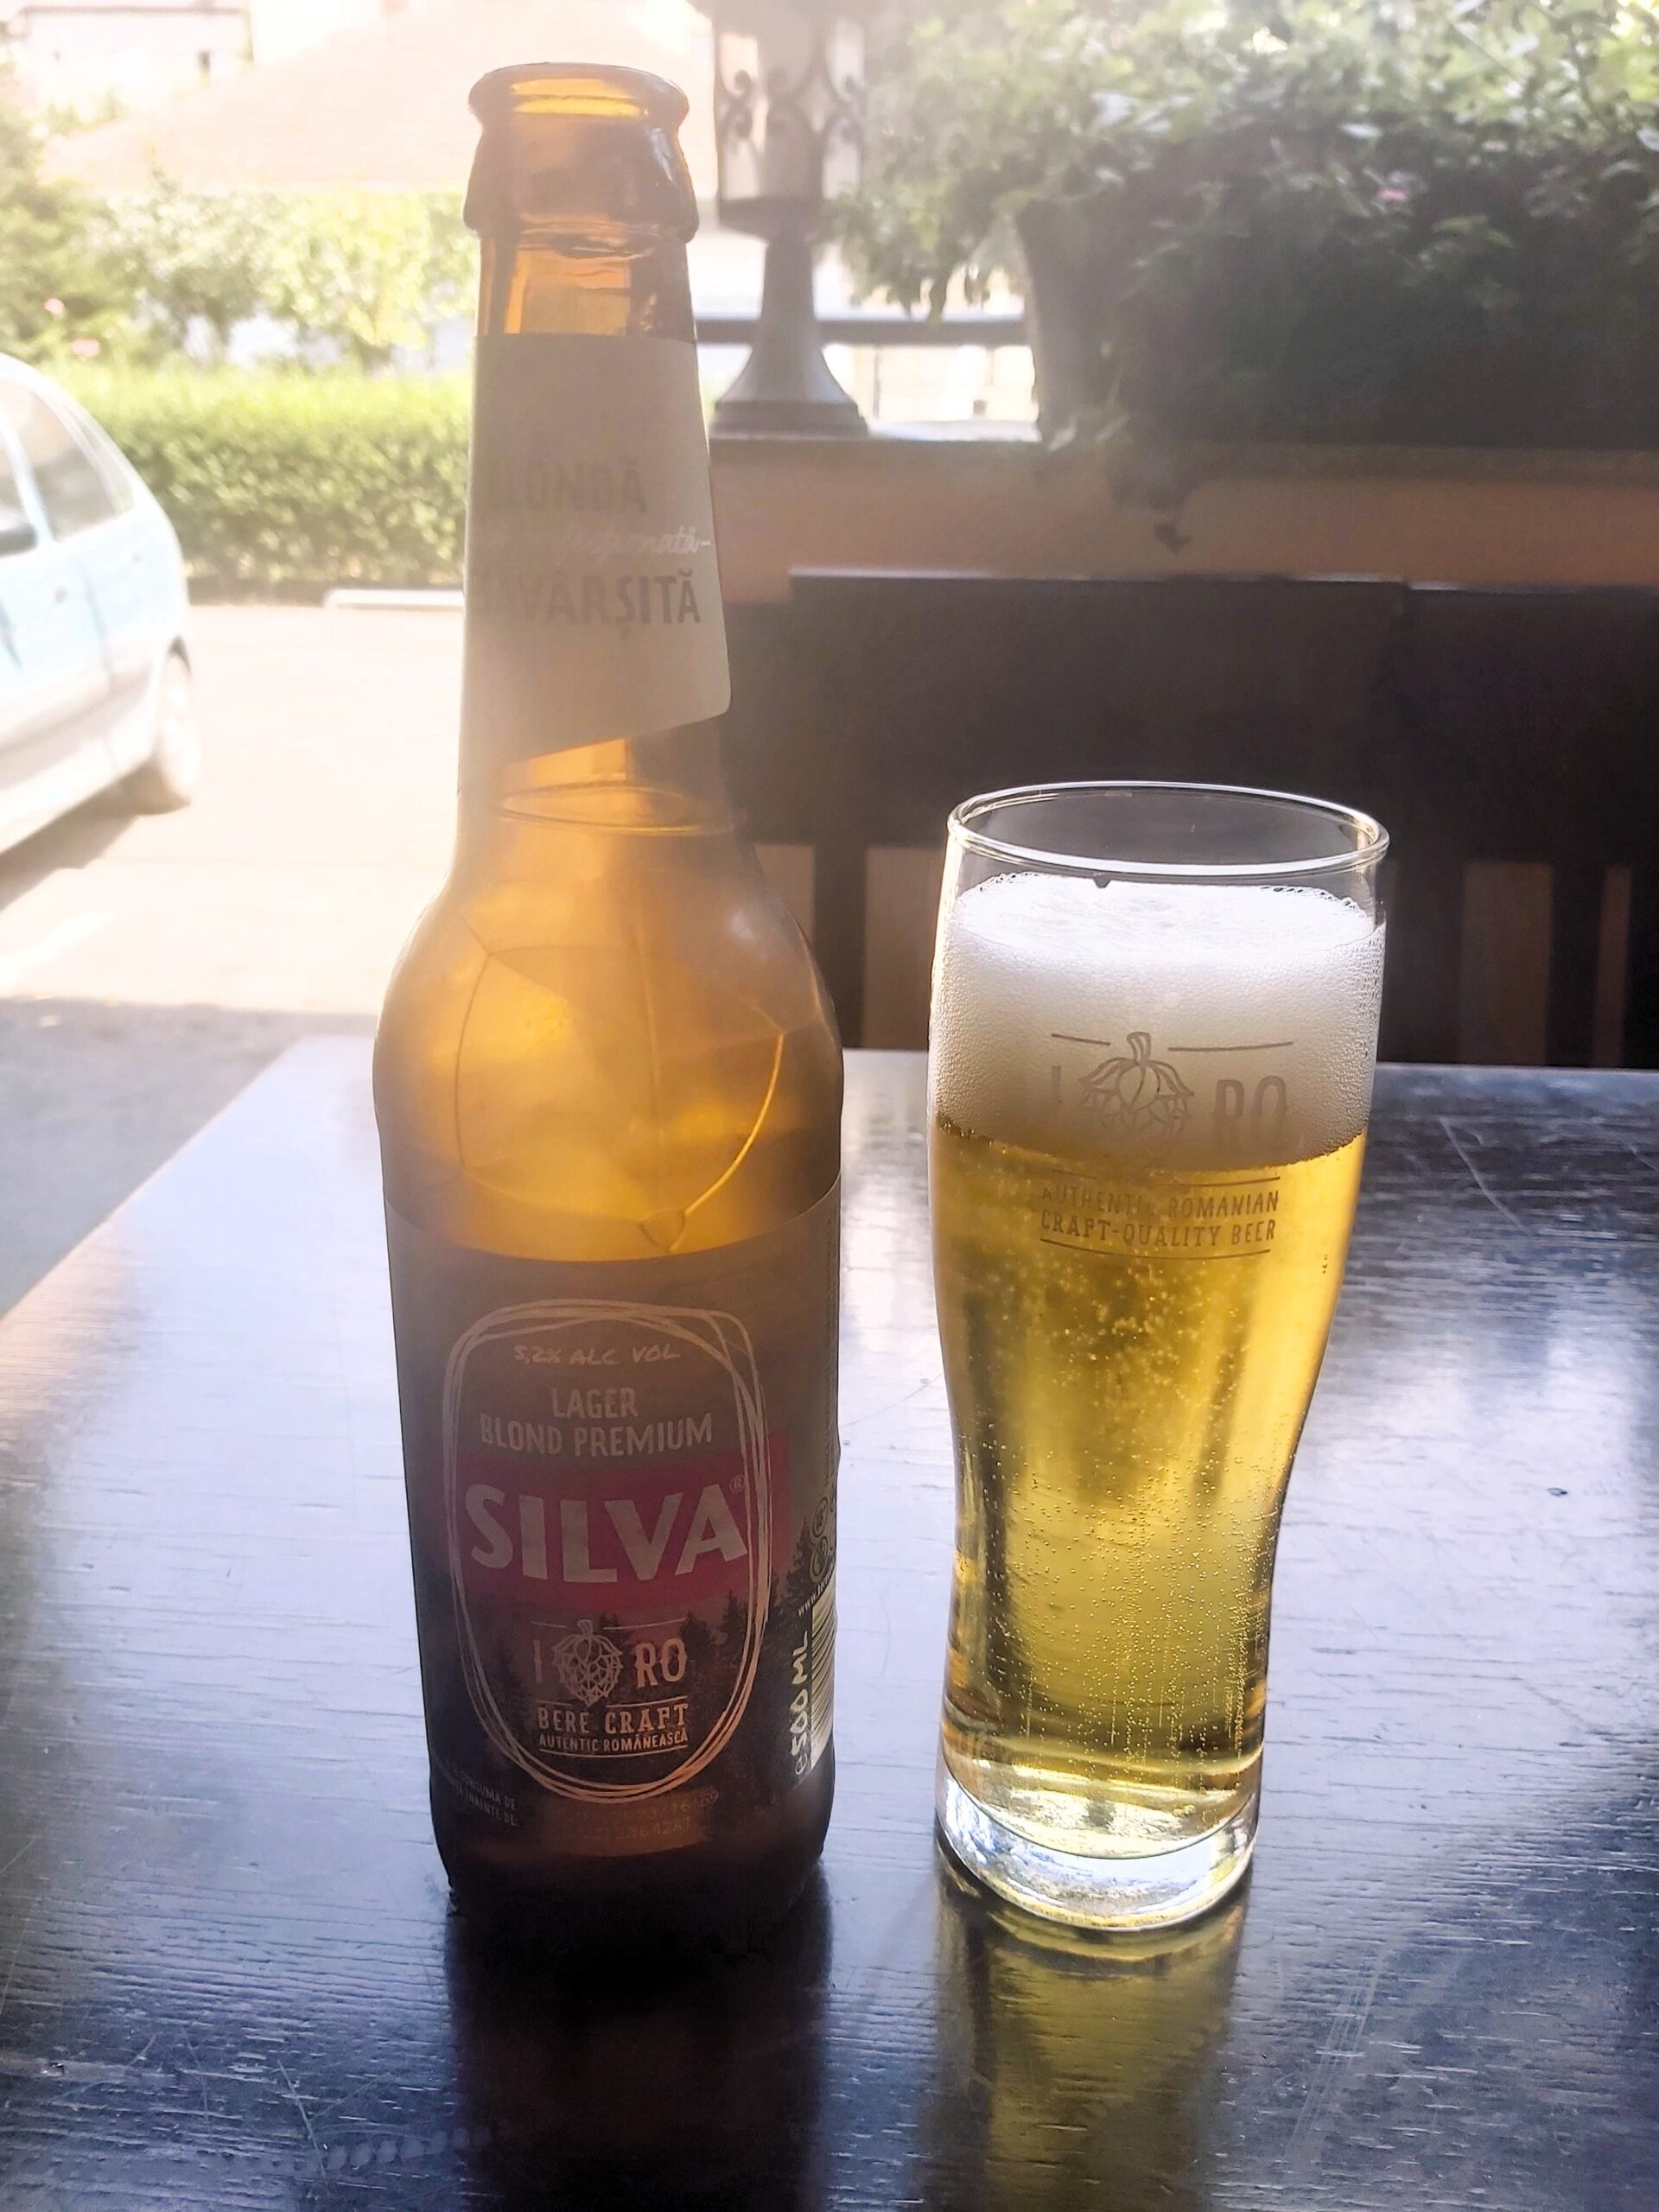 Silva lager bottle and glass in Timisoara, Romania